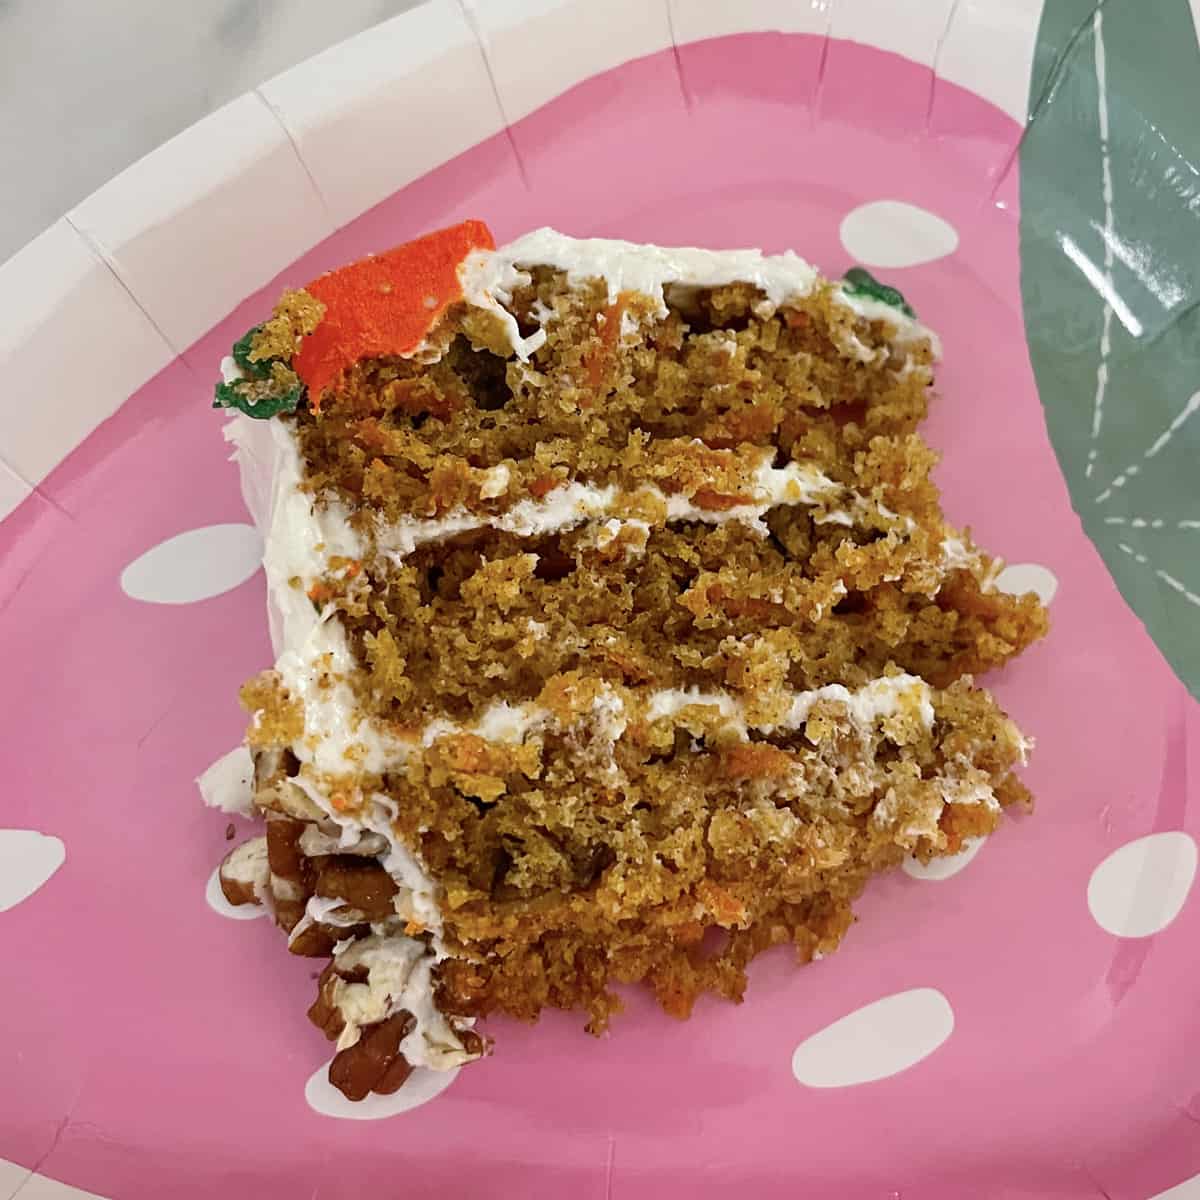 One slice of the most delicious carrot cake.